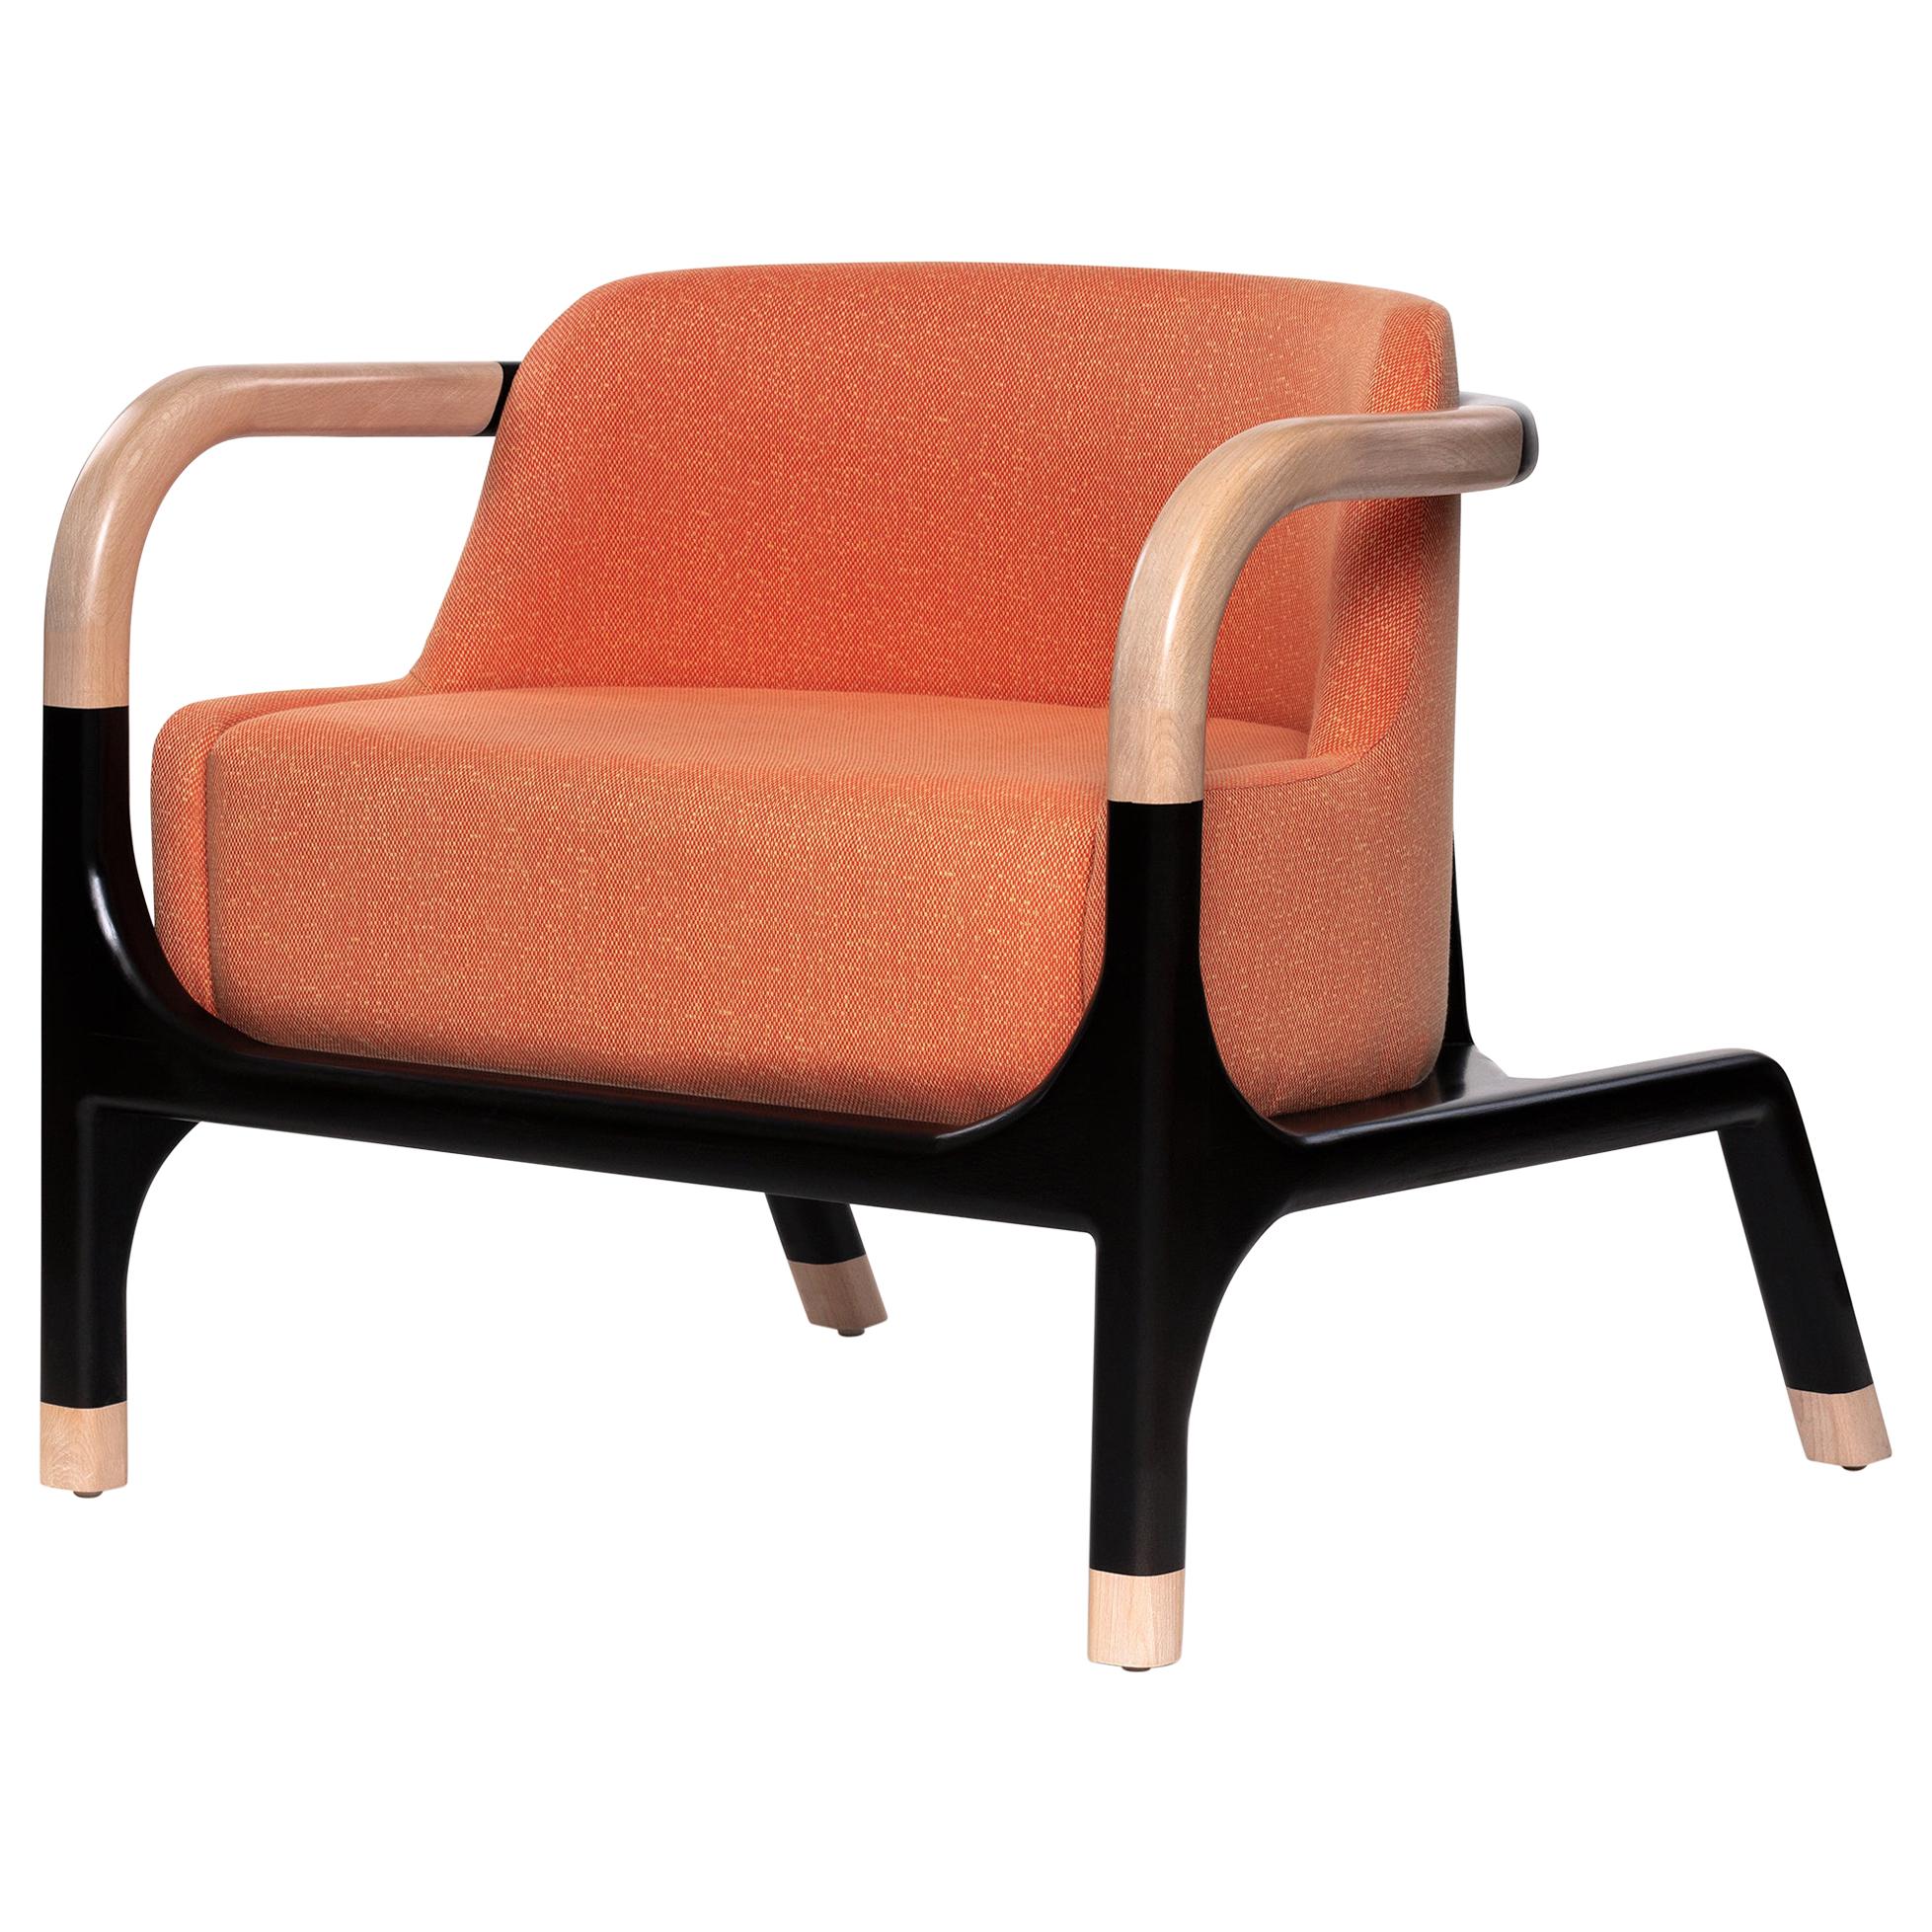 Mid-Century Modern Style Solid Wood Armchair Upholstered in Textile